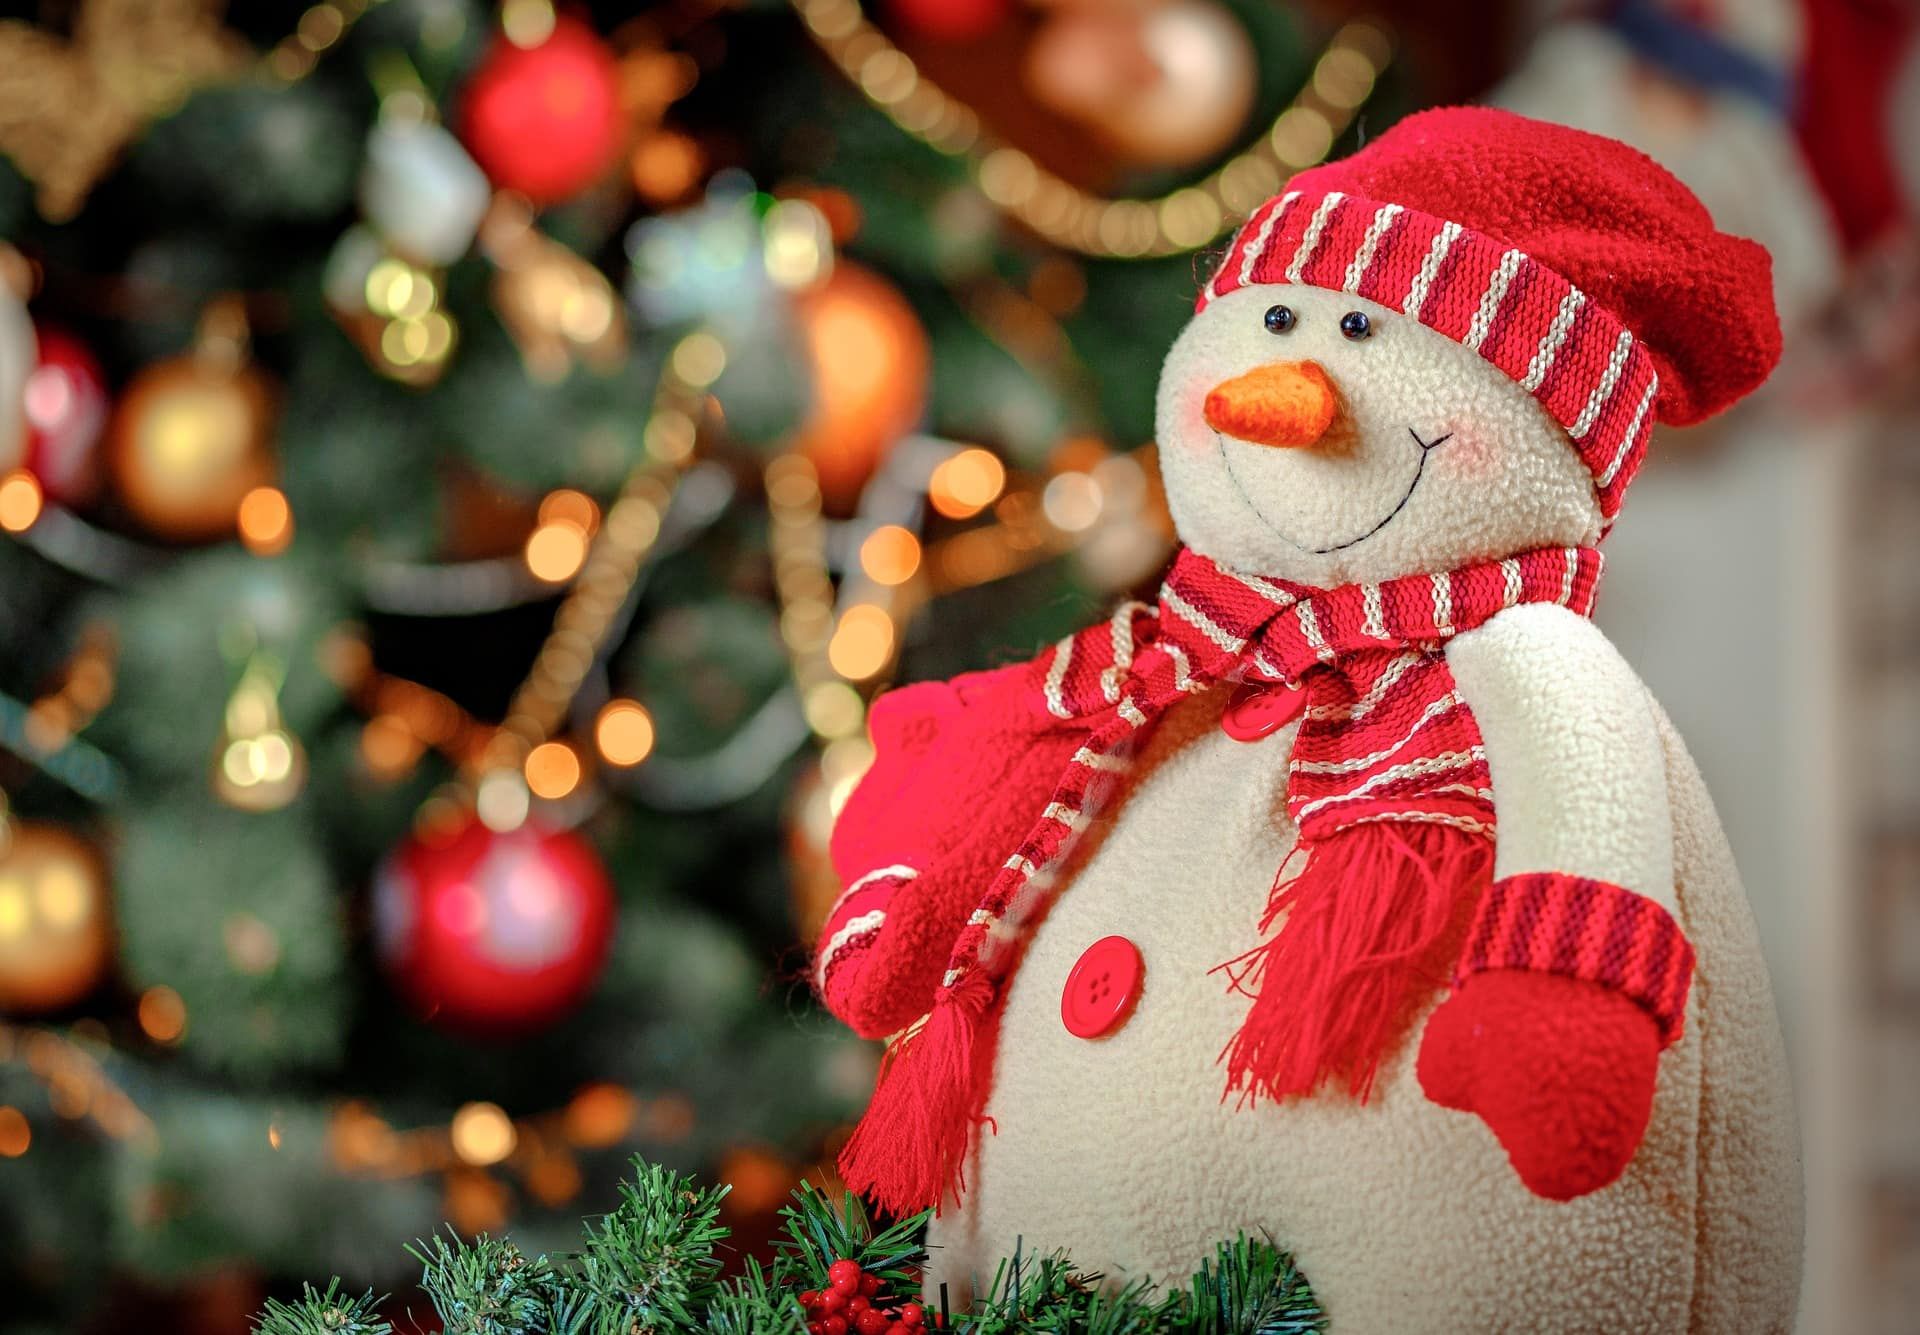 Snowman made of cloth adorned with red hat, scarf and gloves with a blurred christmas tree with decorations on the background